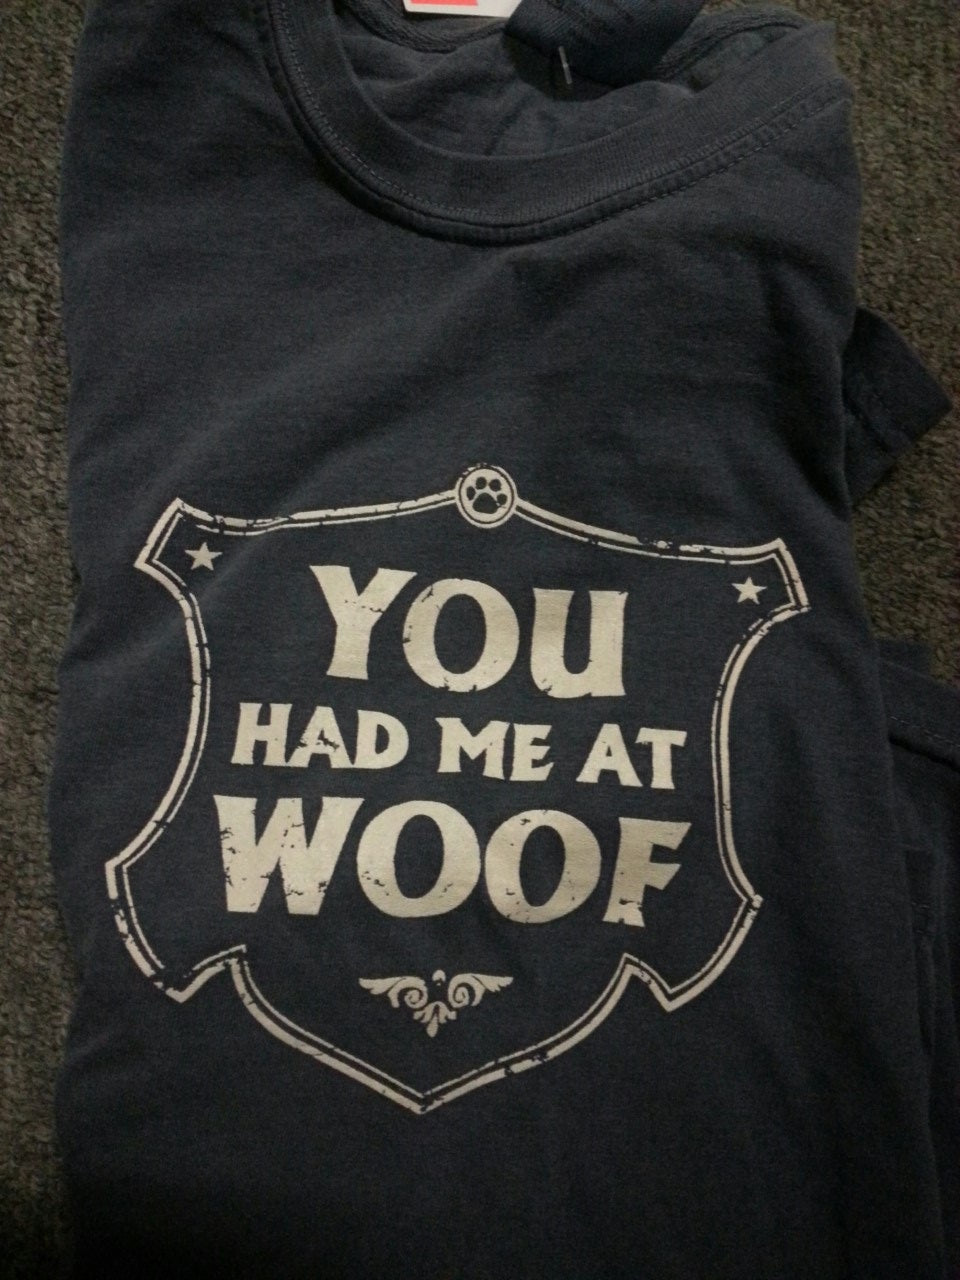 Adult T-Shirt - You Had Me At Woof